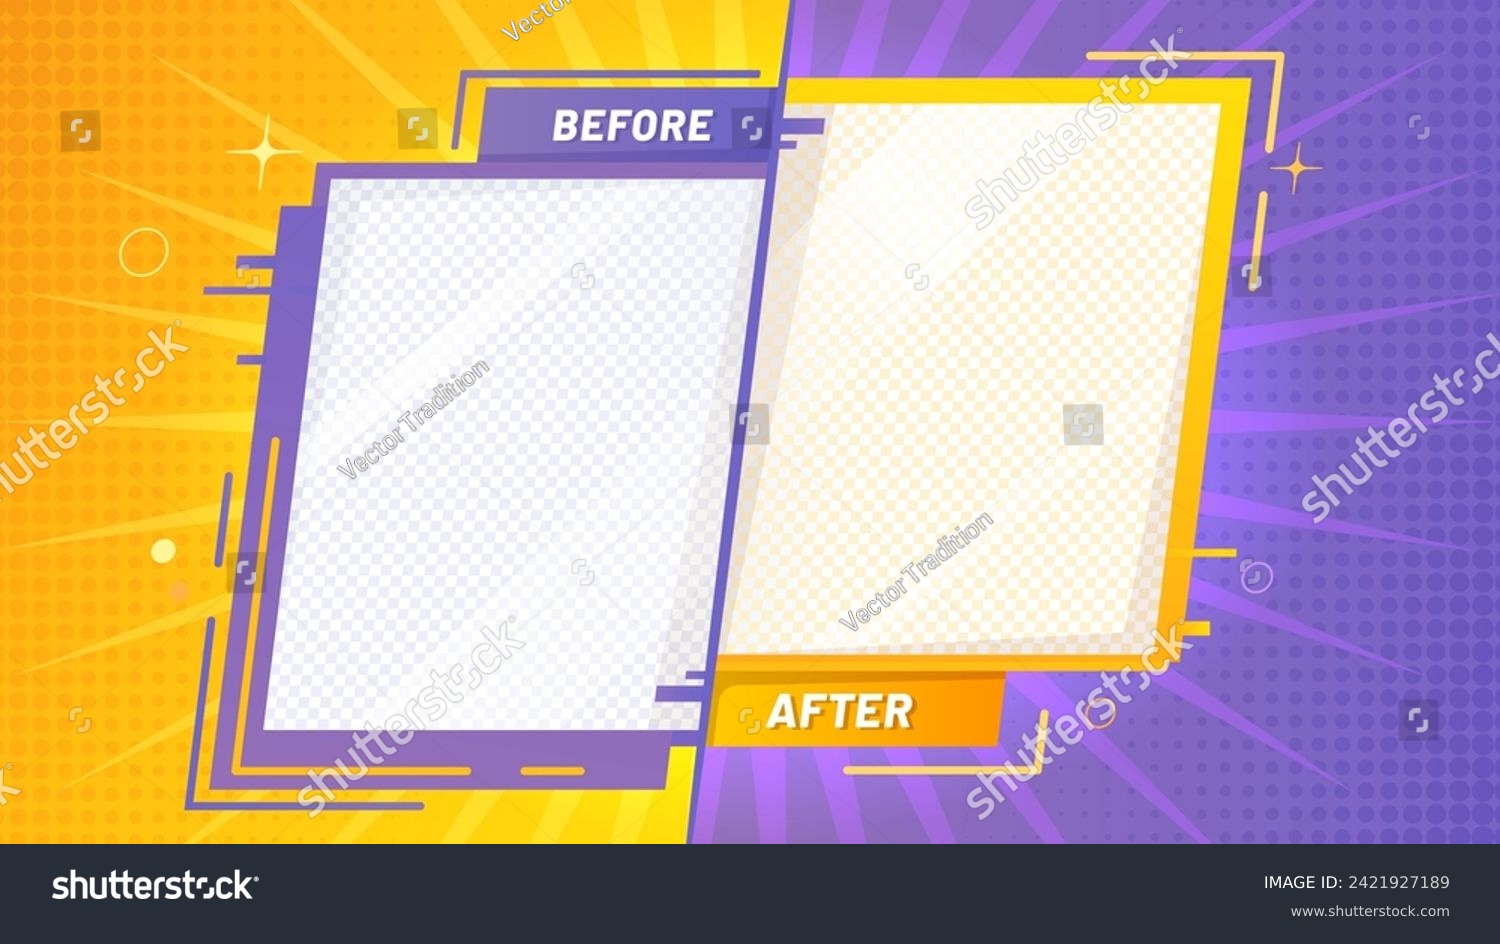 Before after template. Vector yellow and purple color background with halftone dotted pattern, sun rays, sparks and transparent copy space. Borders or photo frames for comparison in retro comic style #2421927189